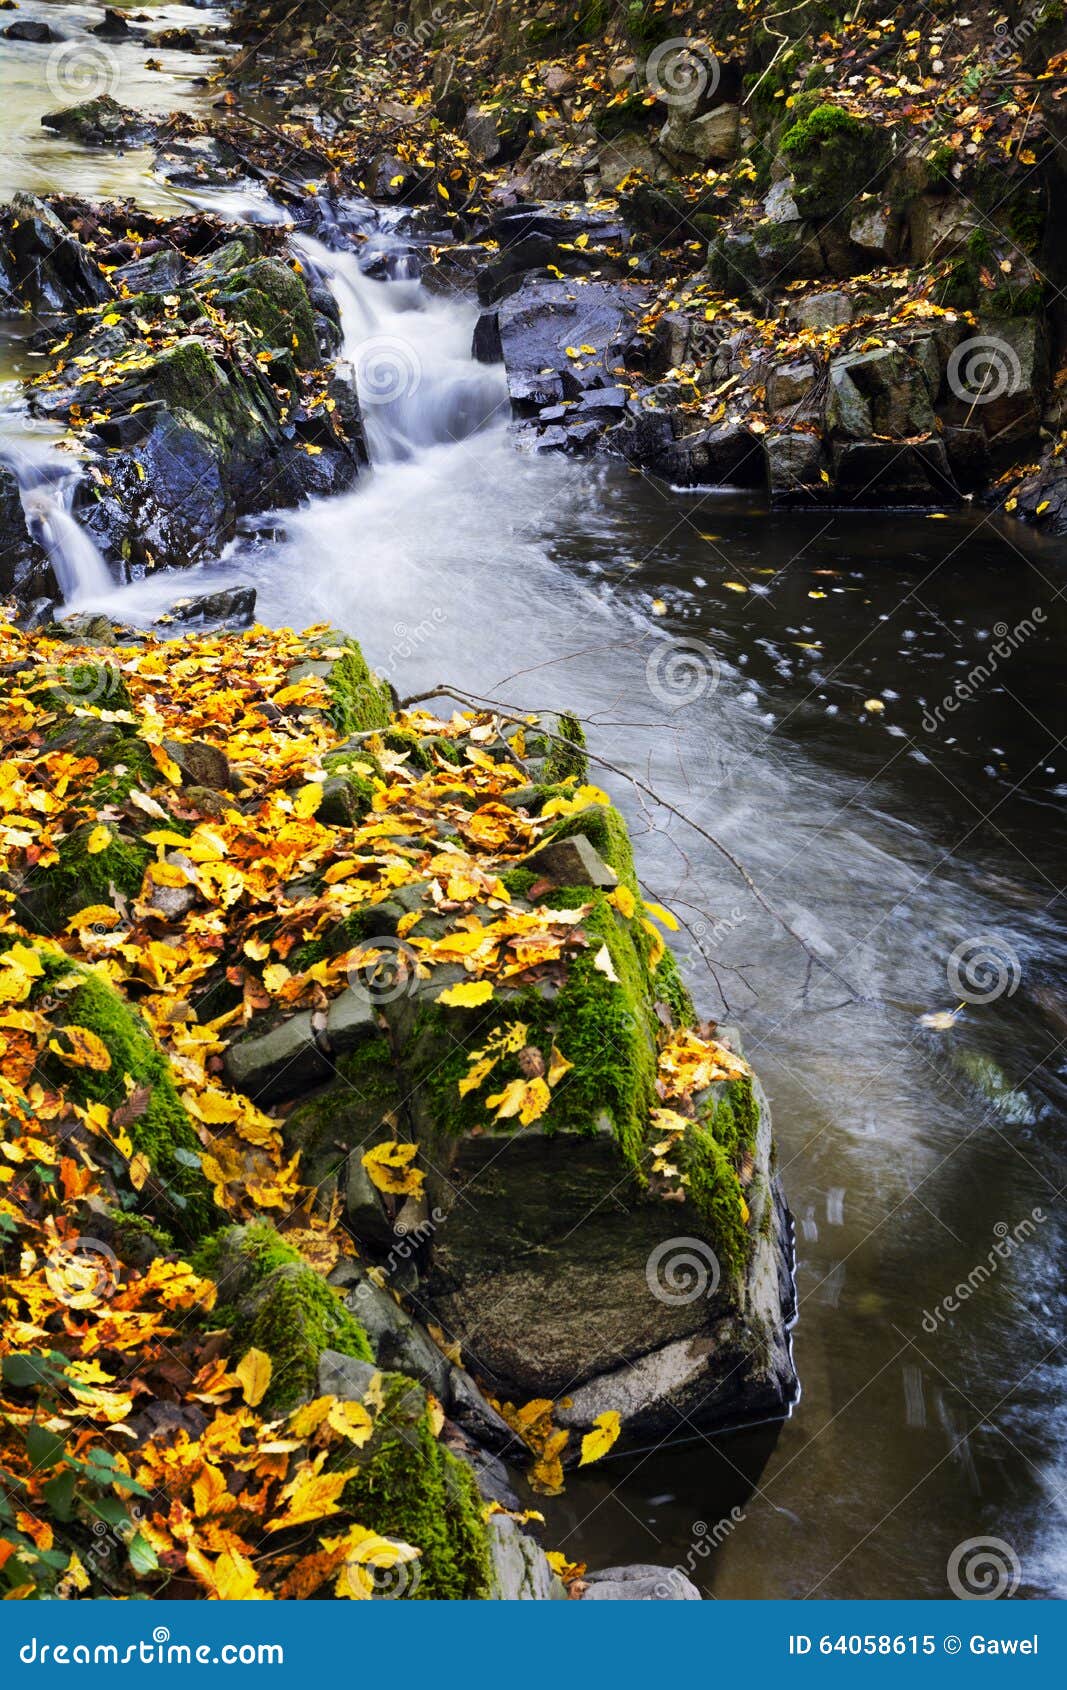 River And Yellow Leaves In Autumn Season Stock Image Image Of Tarare